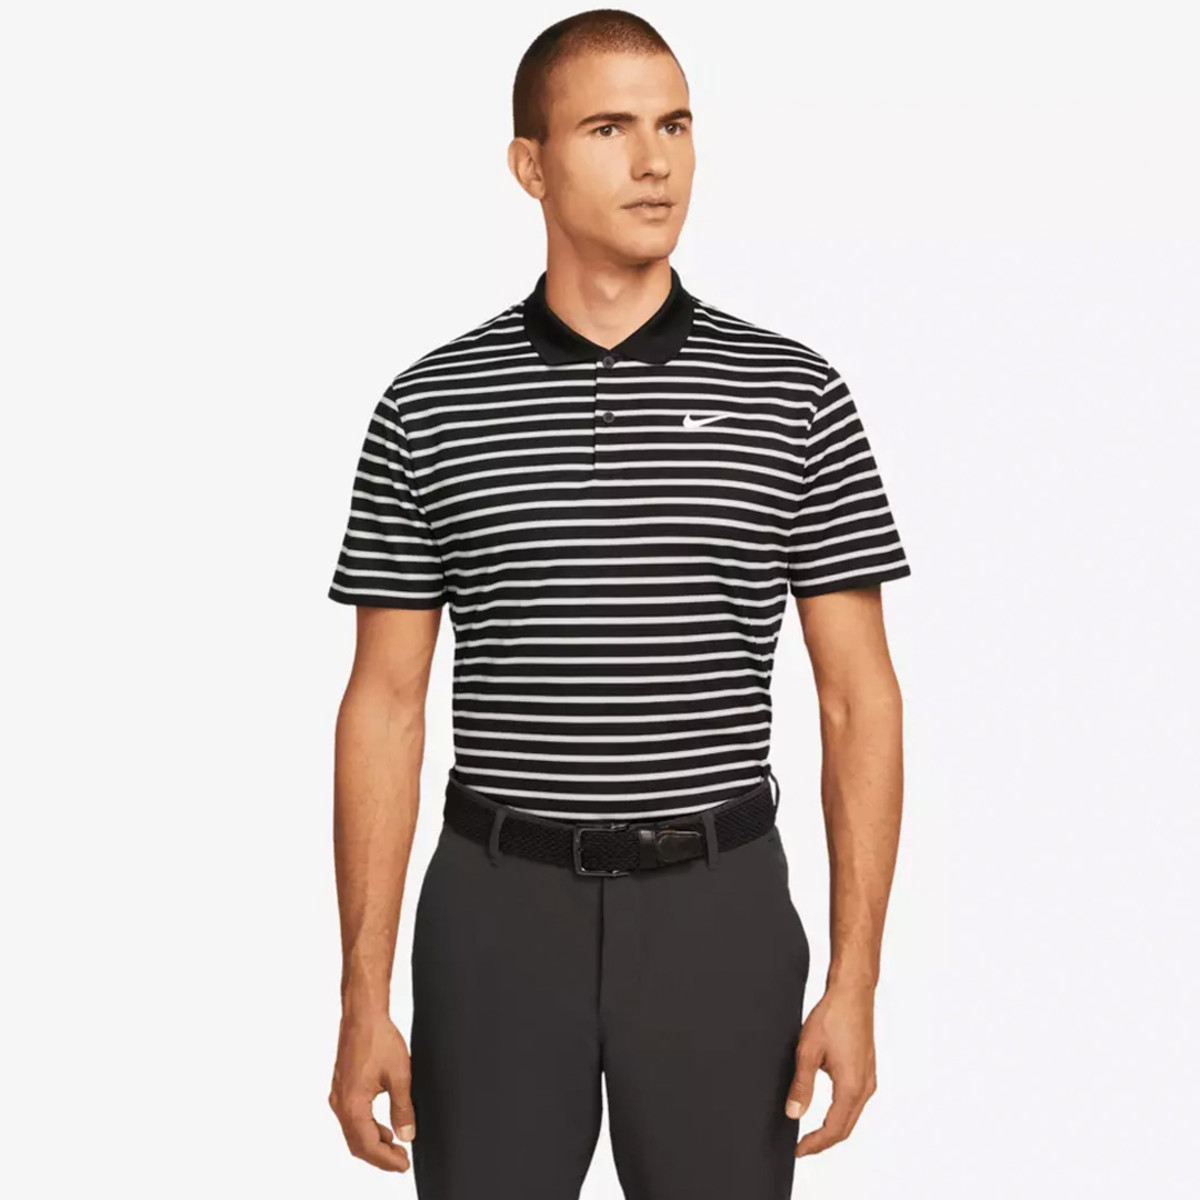 The Nike Dri-Fit Victory Men's Golf Polo is on sale right now at PGA Tour Superstore